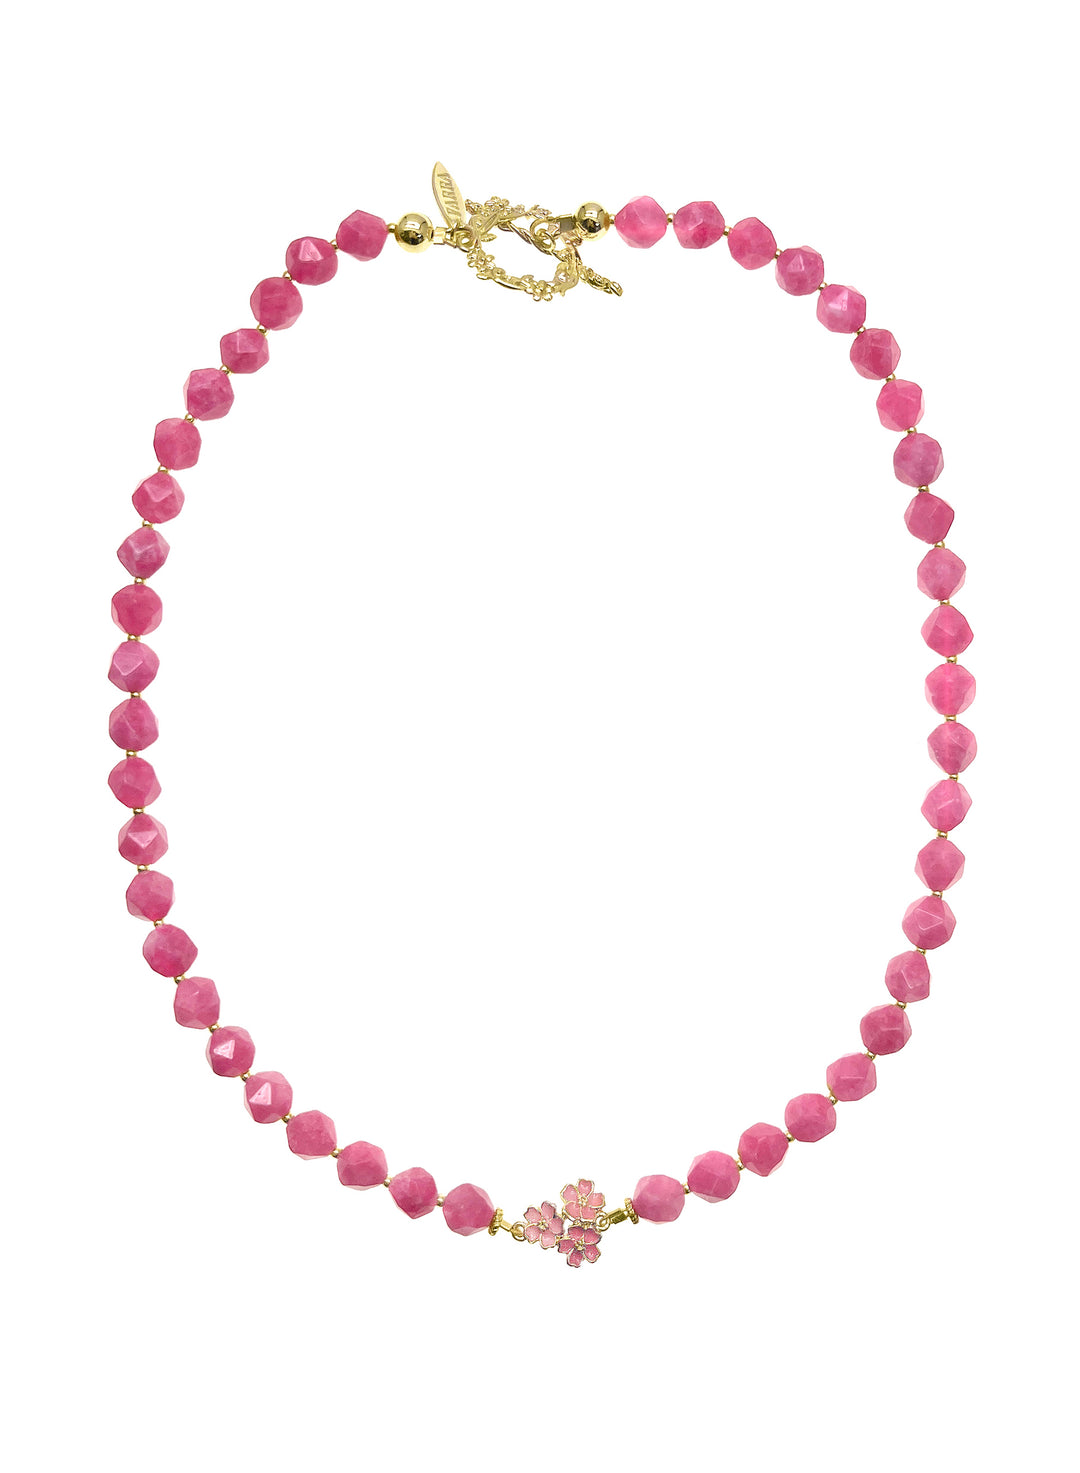 Pink Faceted Gemstone With Flower Pendant Necklace LN002 - FARRA